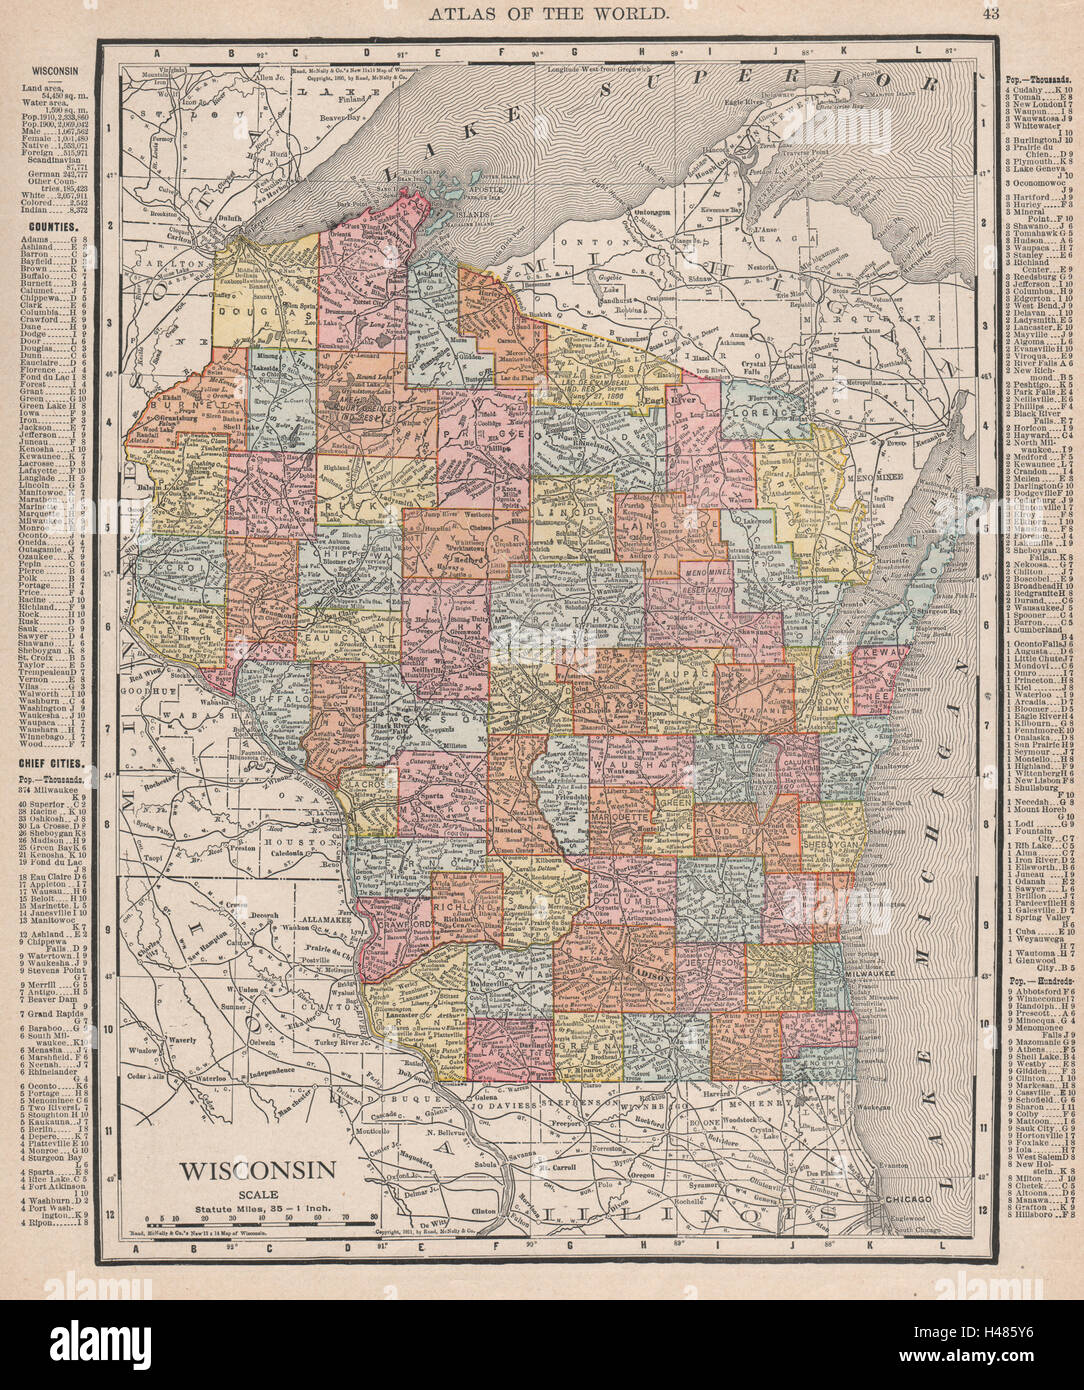 Wisconsin state map showing counties. RAND MCNALLY 1912 old antique chart Stock Photo